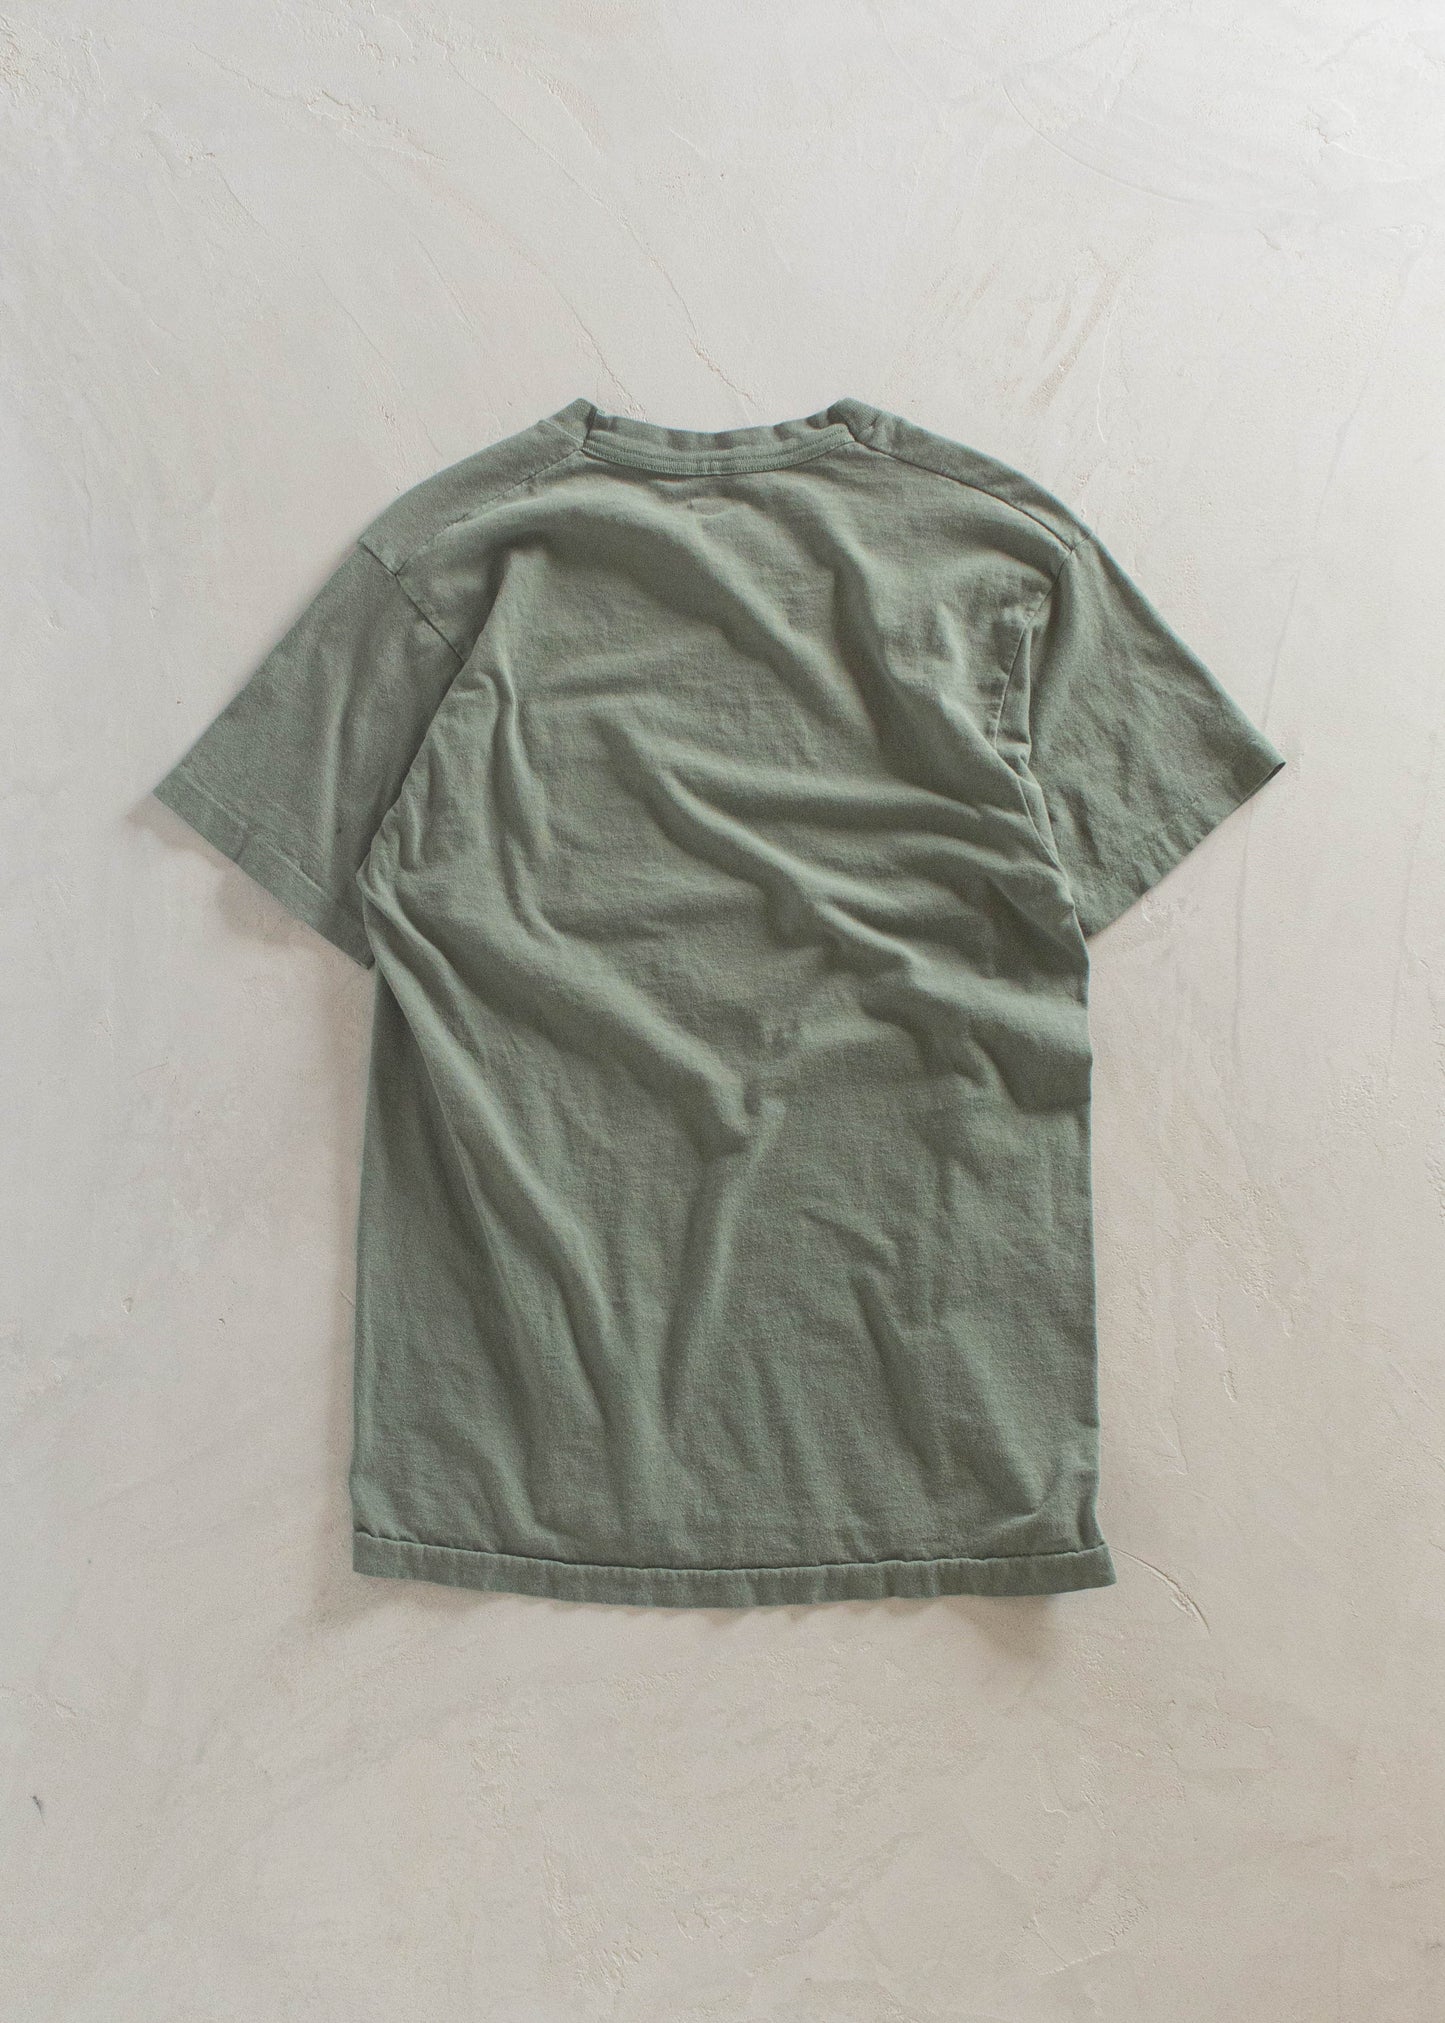 1980s Fruit of the Loom Selvedge Pocket T-Shirt Size S/M